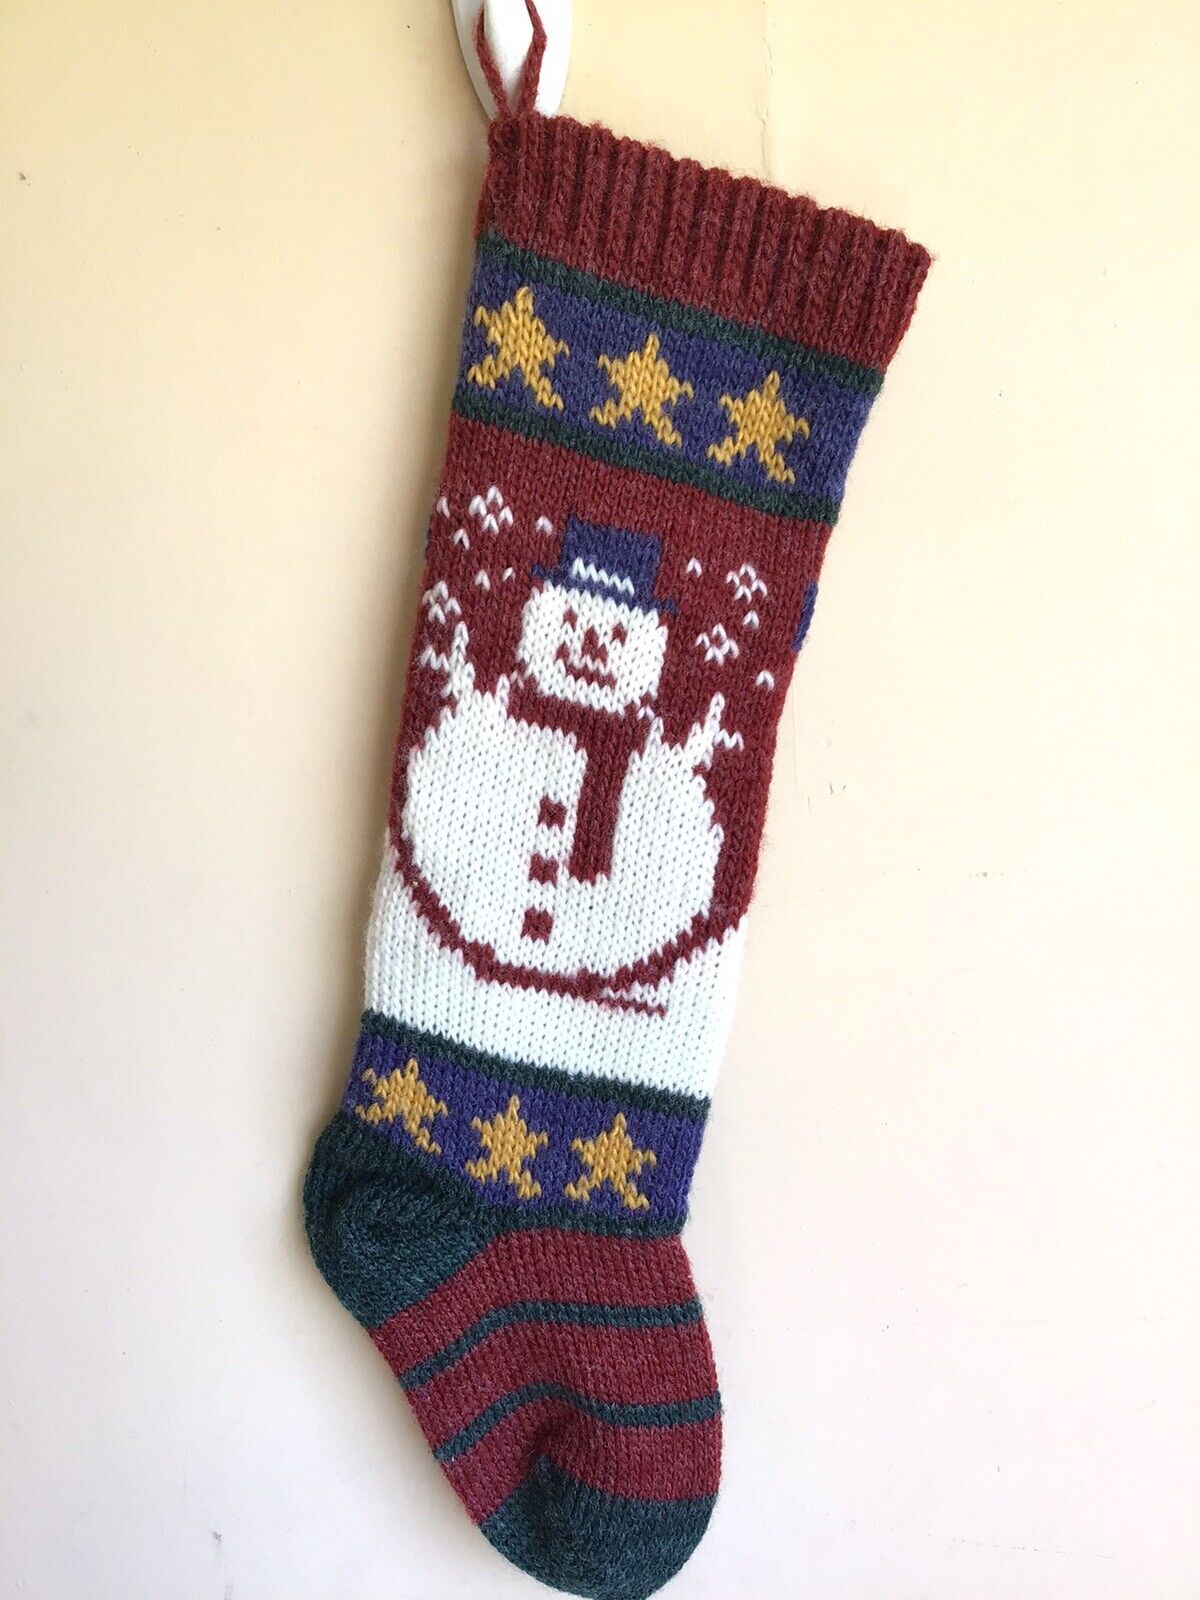 Vintage Russ Berrie Knitted Acrylic Sock Maroon Snowman Christmas Stocking